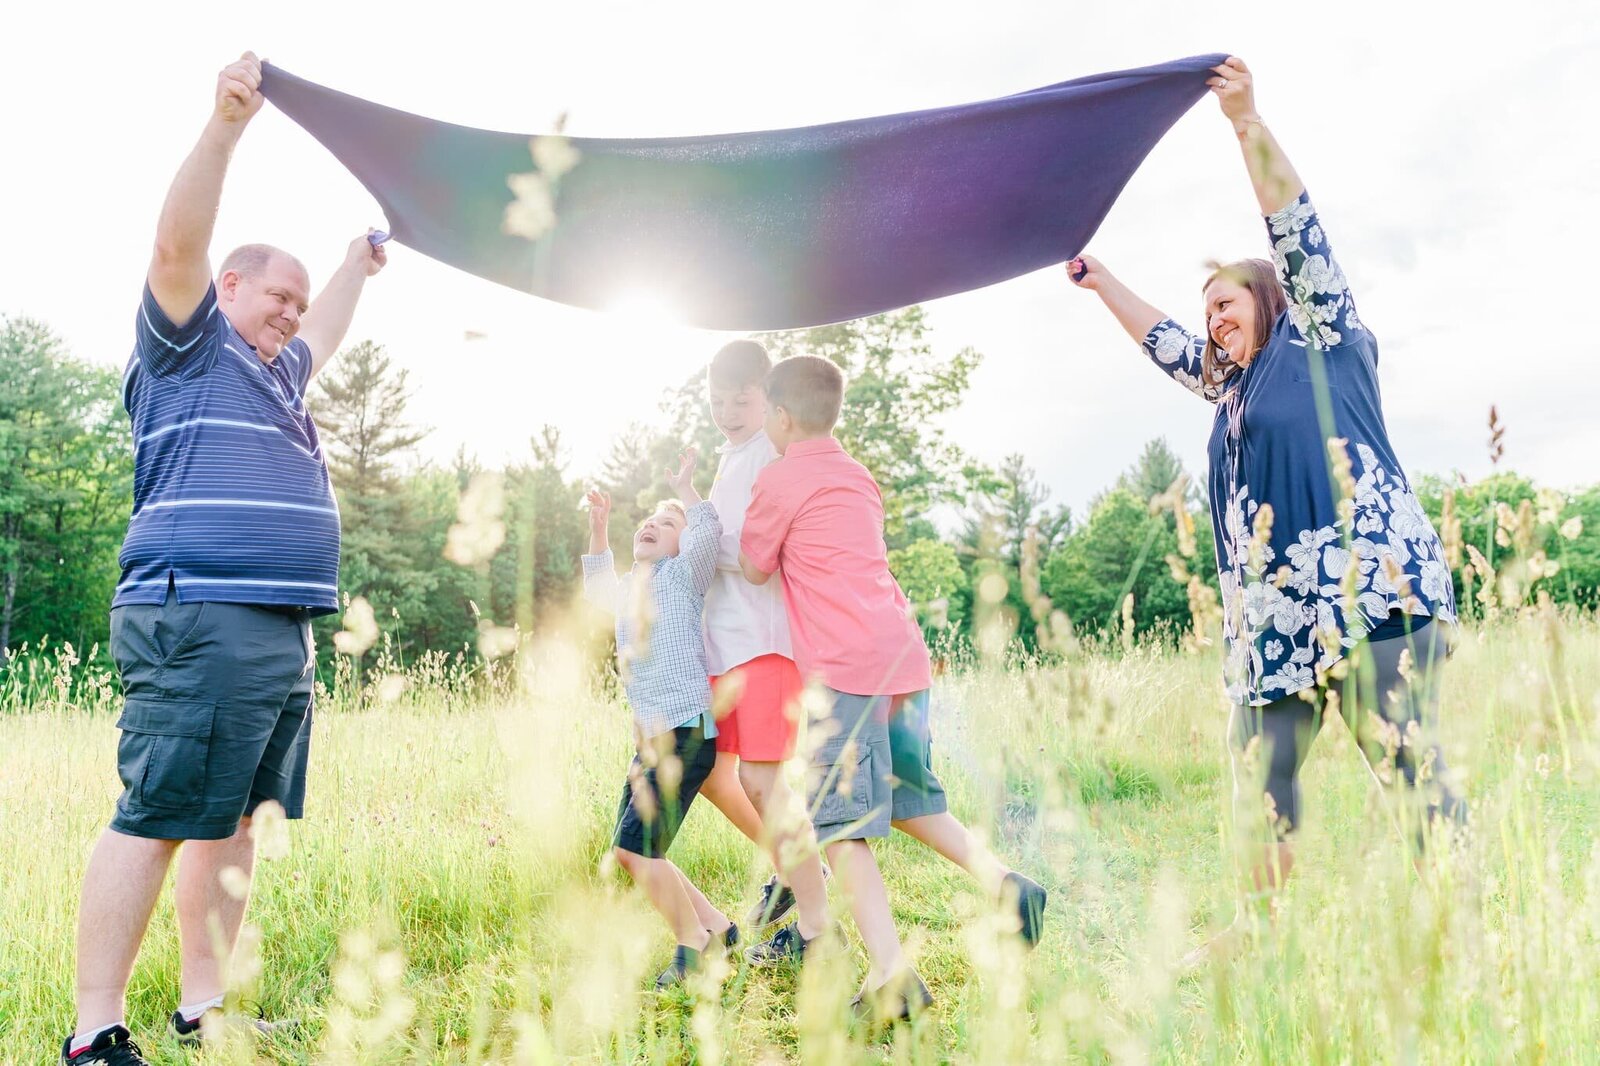 Blanket up in the air for family photos